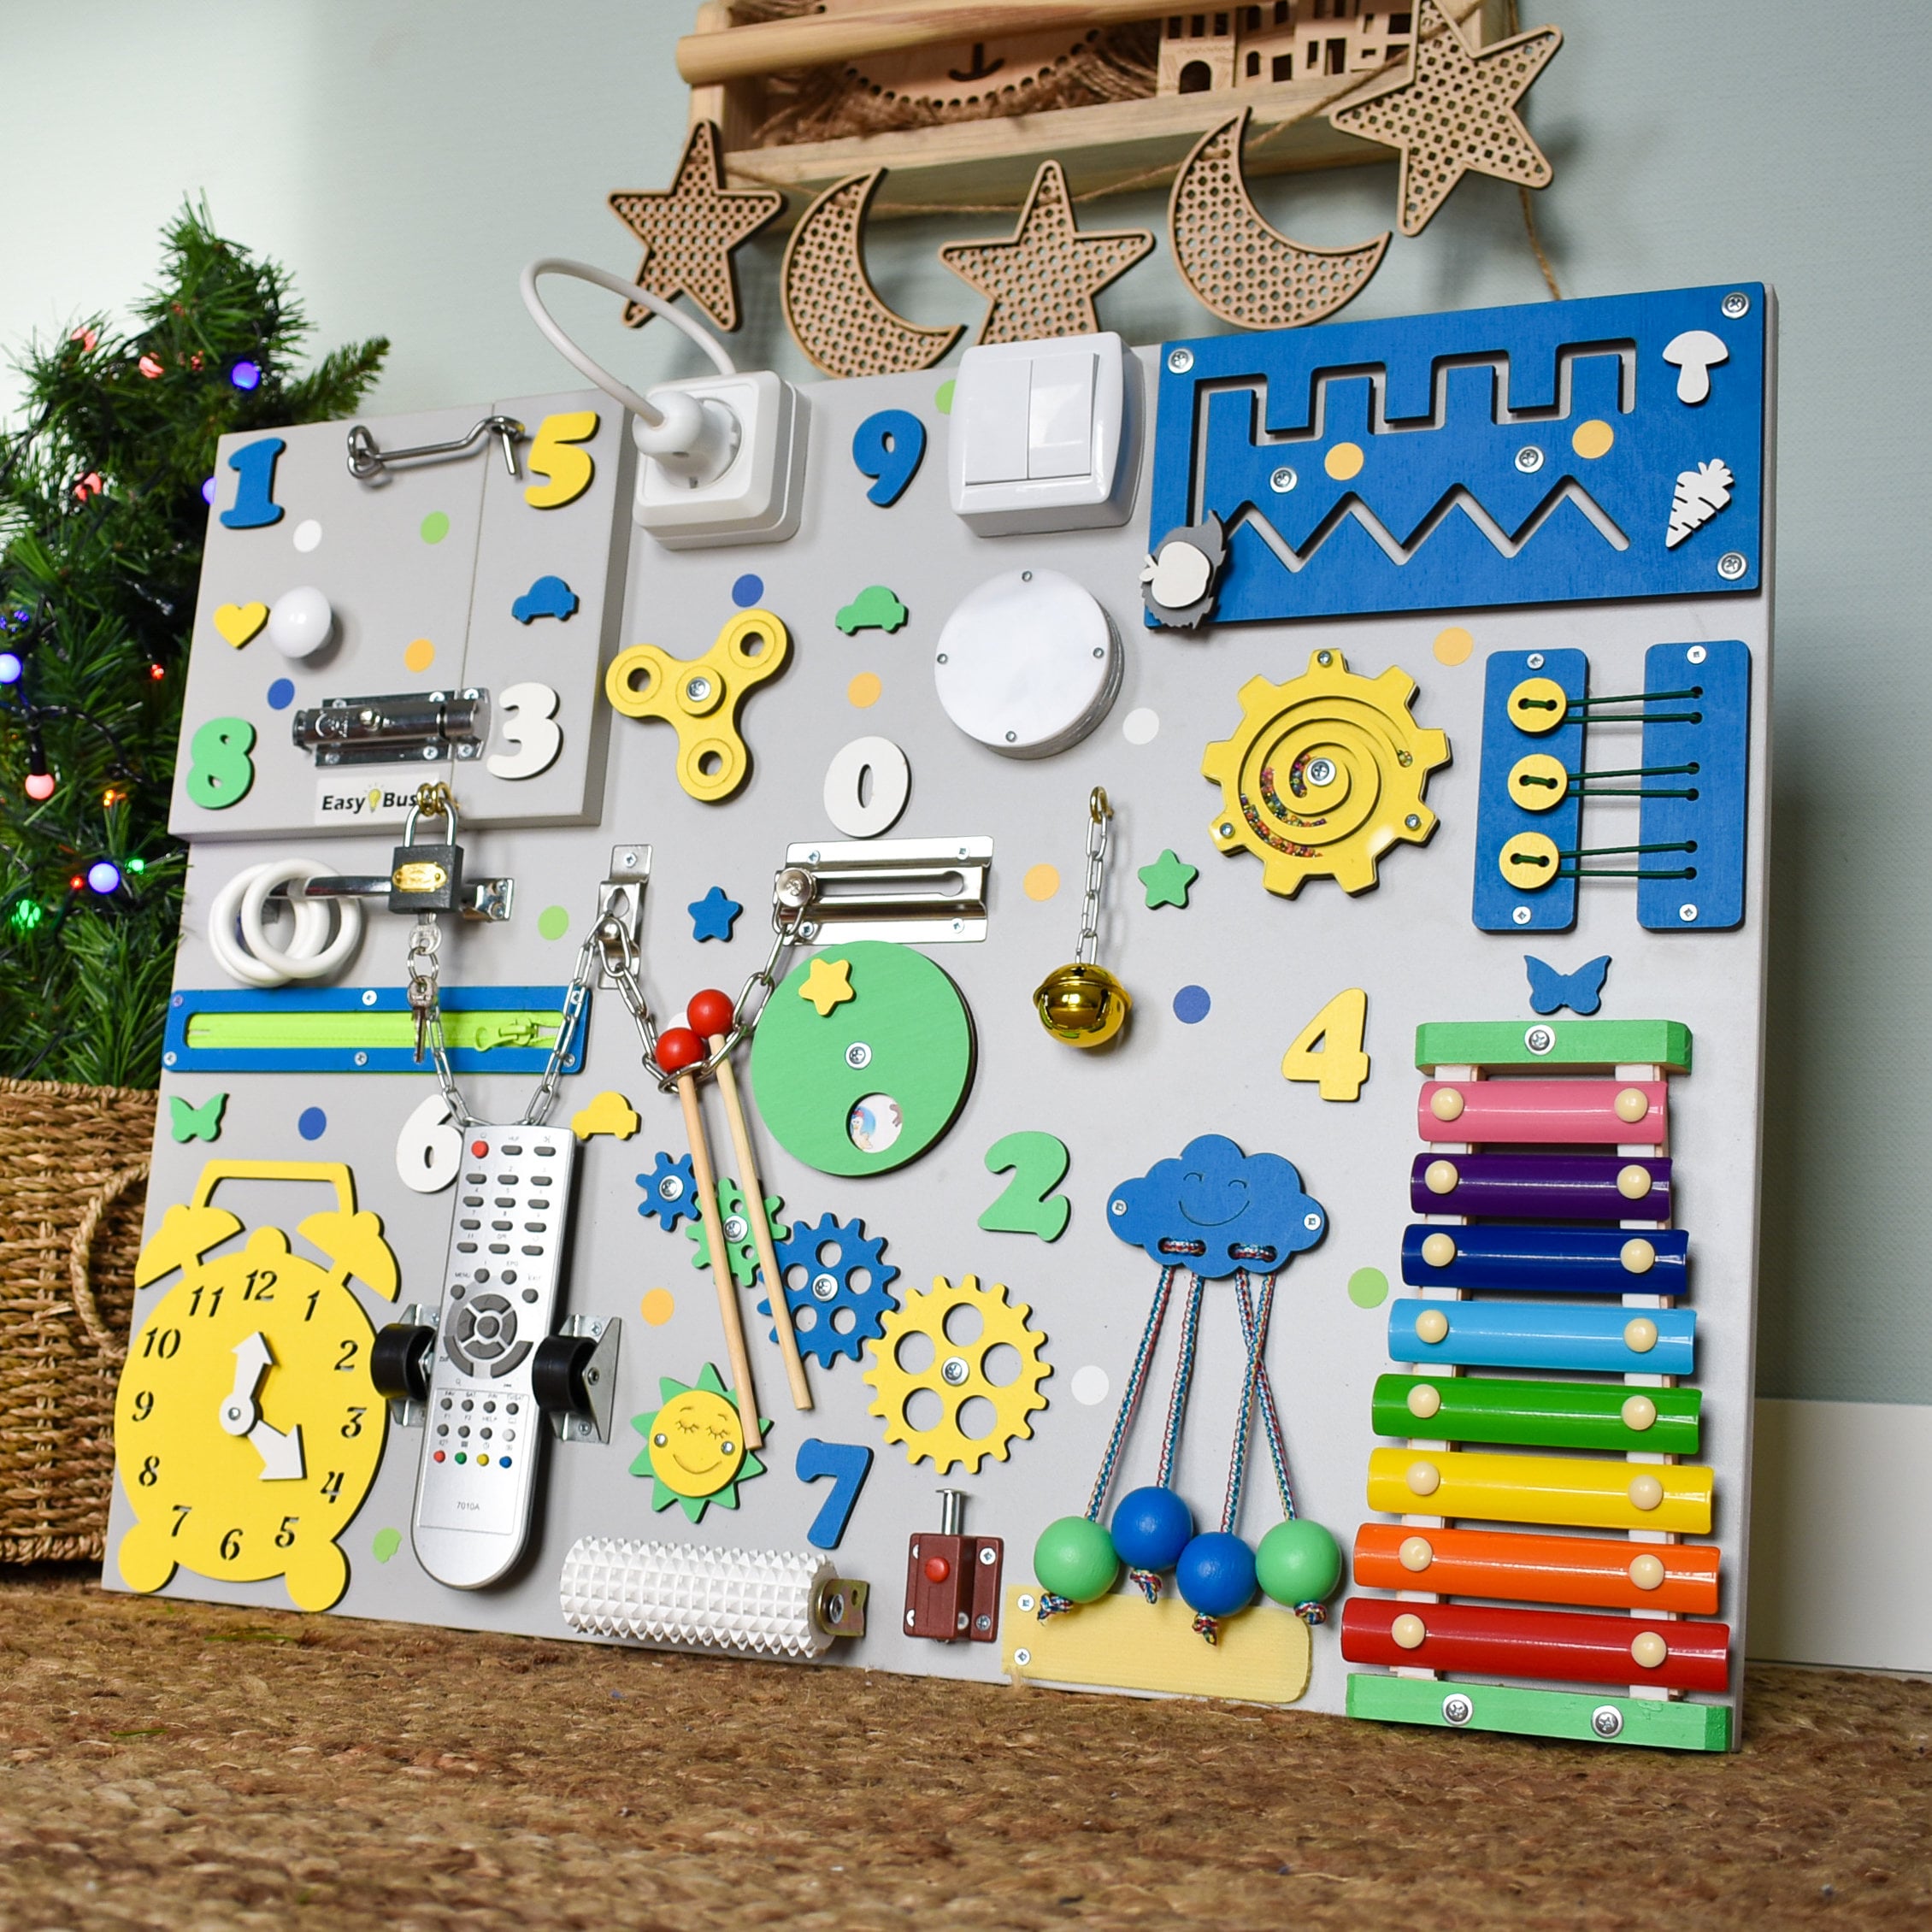  Creative Light Up Board for Kids with 360+ Pegs and 10